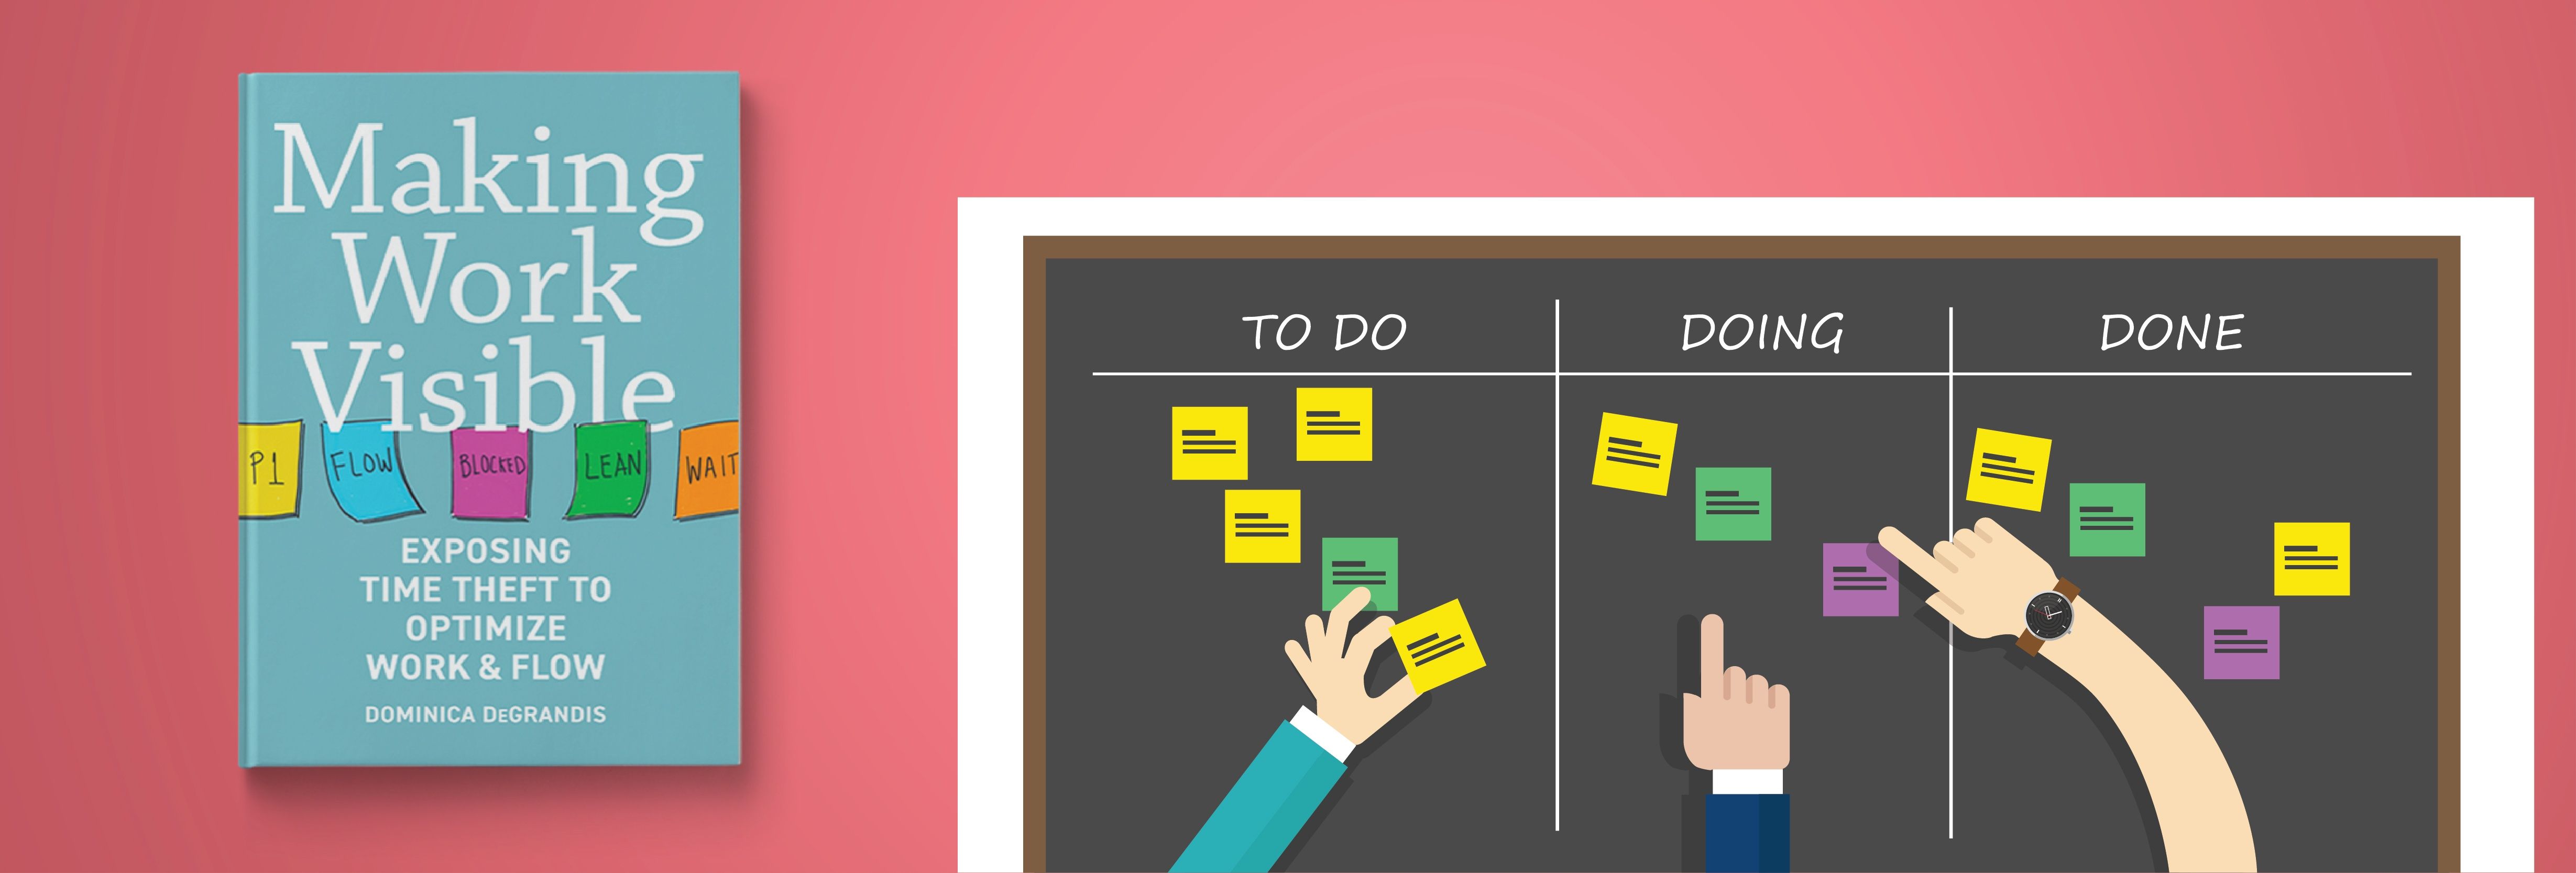 Making Work Visible: How To Use Kanban To Conquer Your To-Do-List And Do Your Best Work